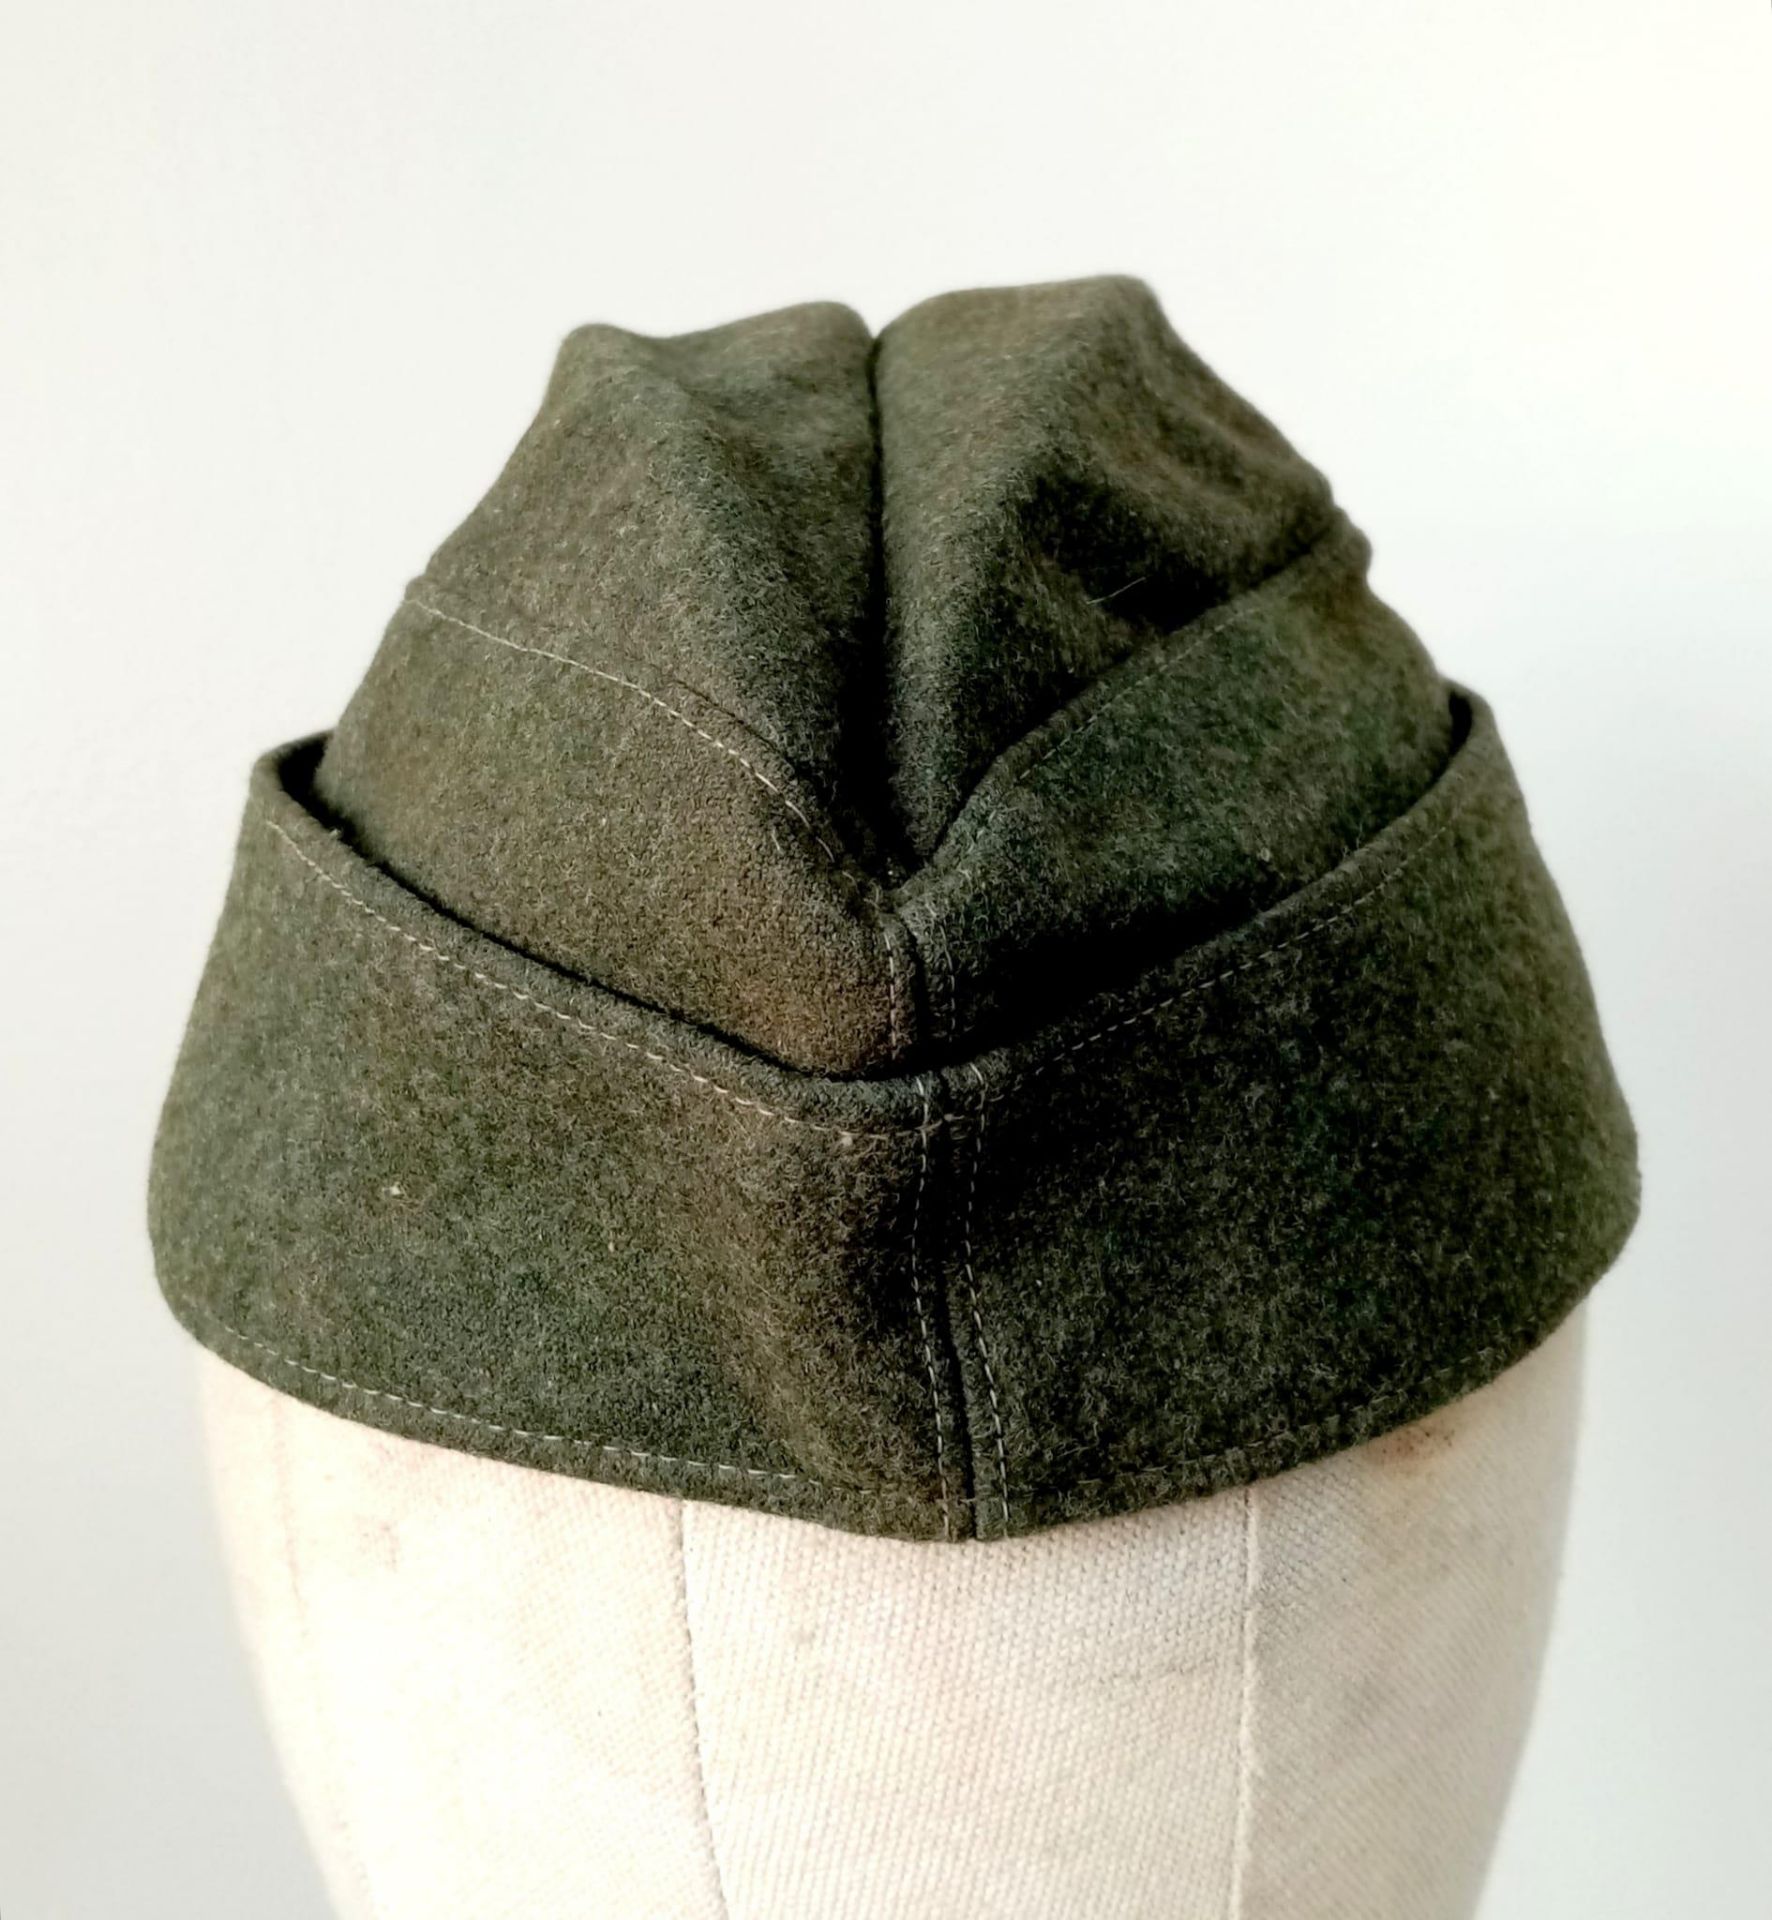 WW2 German Heer (Army) M34 Overseas Side Cap. Good condition for its age. - Image 6 of 11